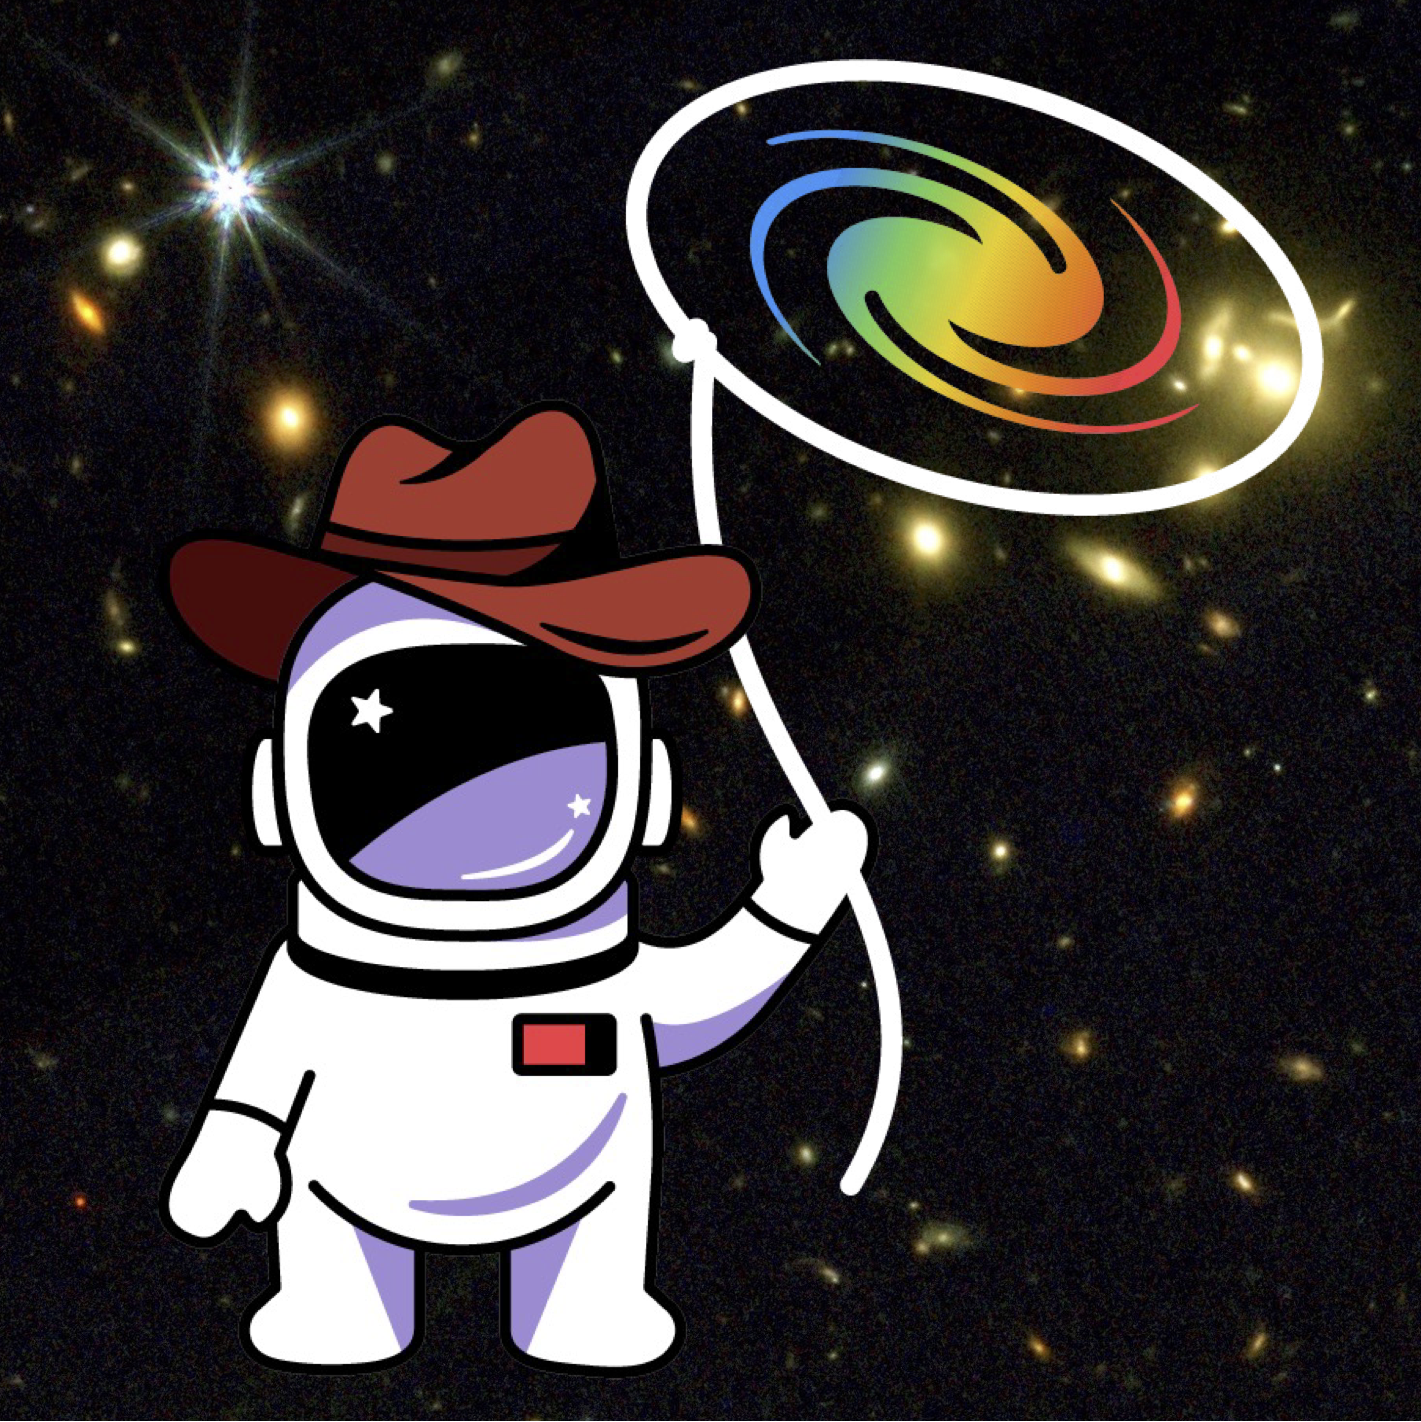 Cartoon illustration of an astronaut wearing a red cowboy hat and holding a lasso with a rainbow colored spiral galaxy inside the loop